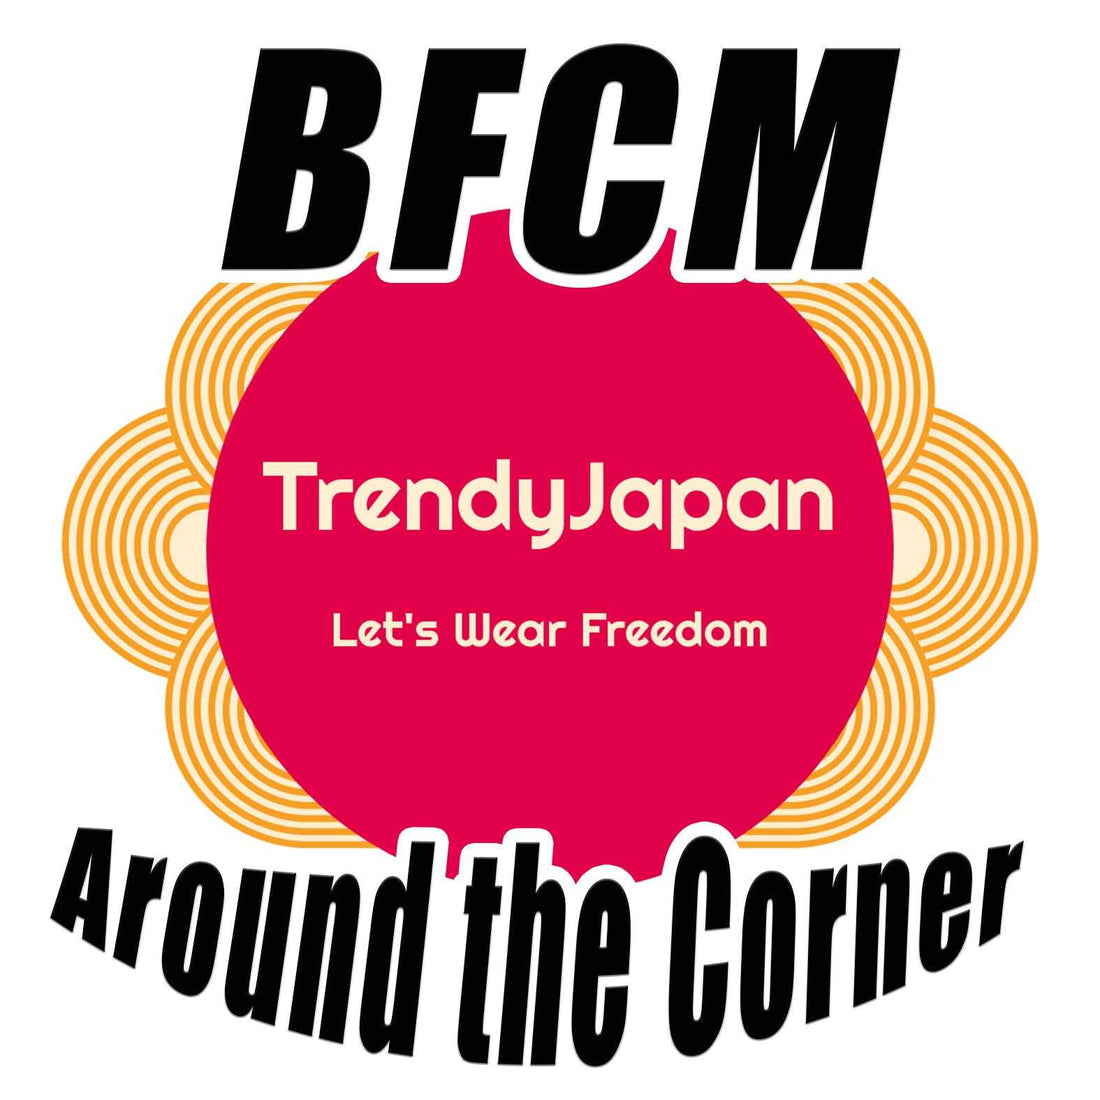 We have created a video for the BFCM discount sale.